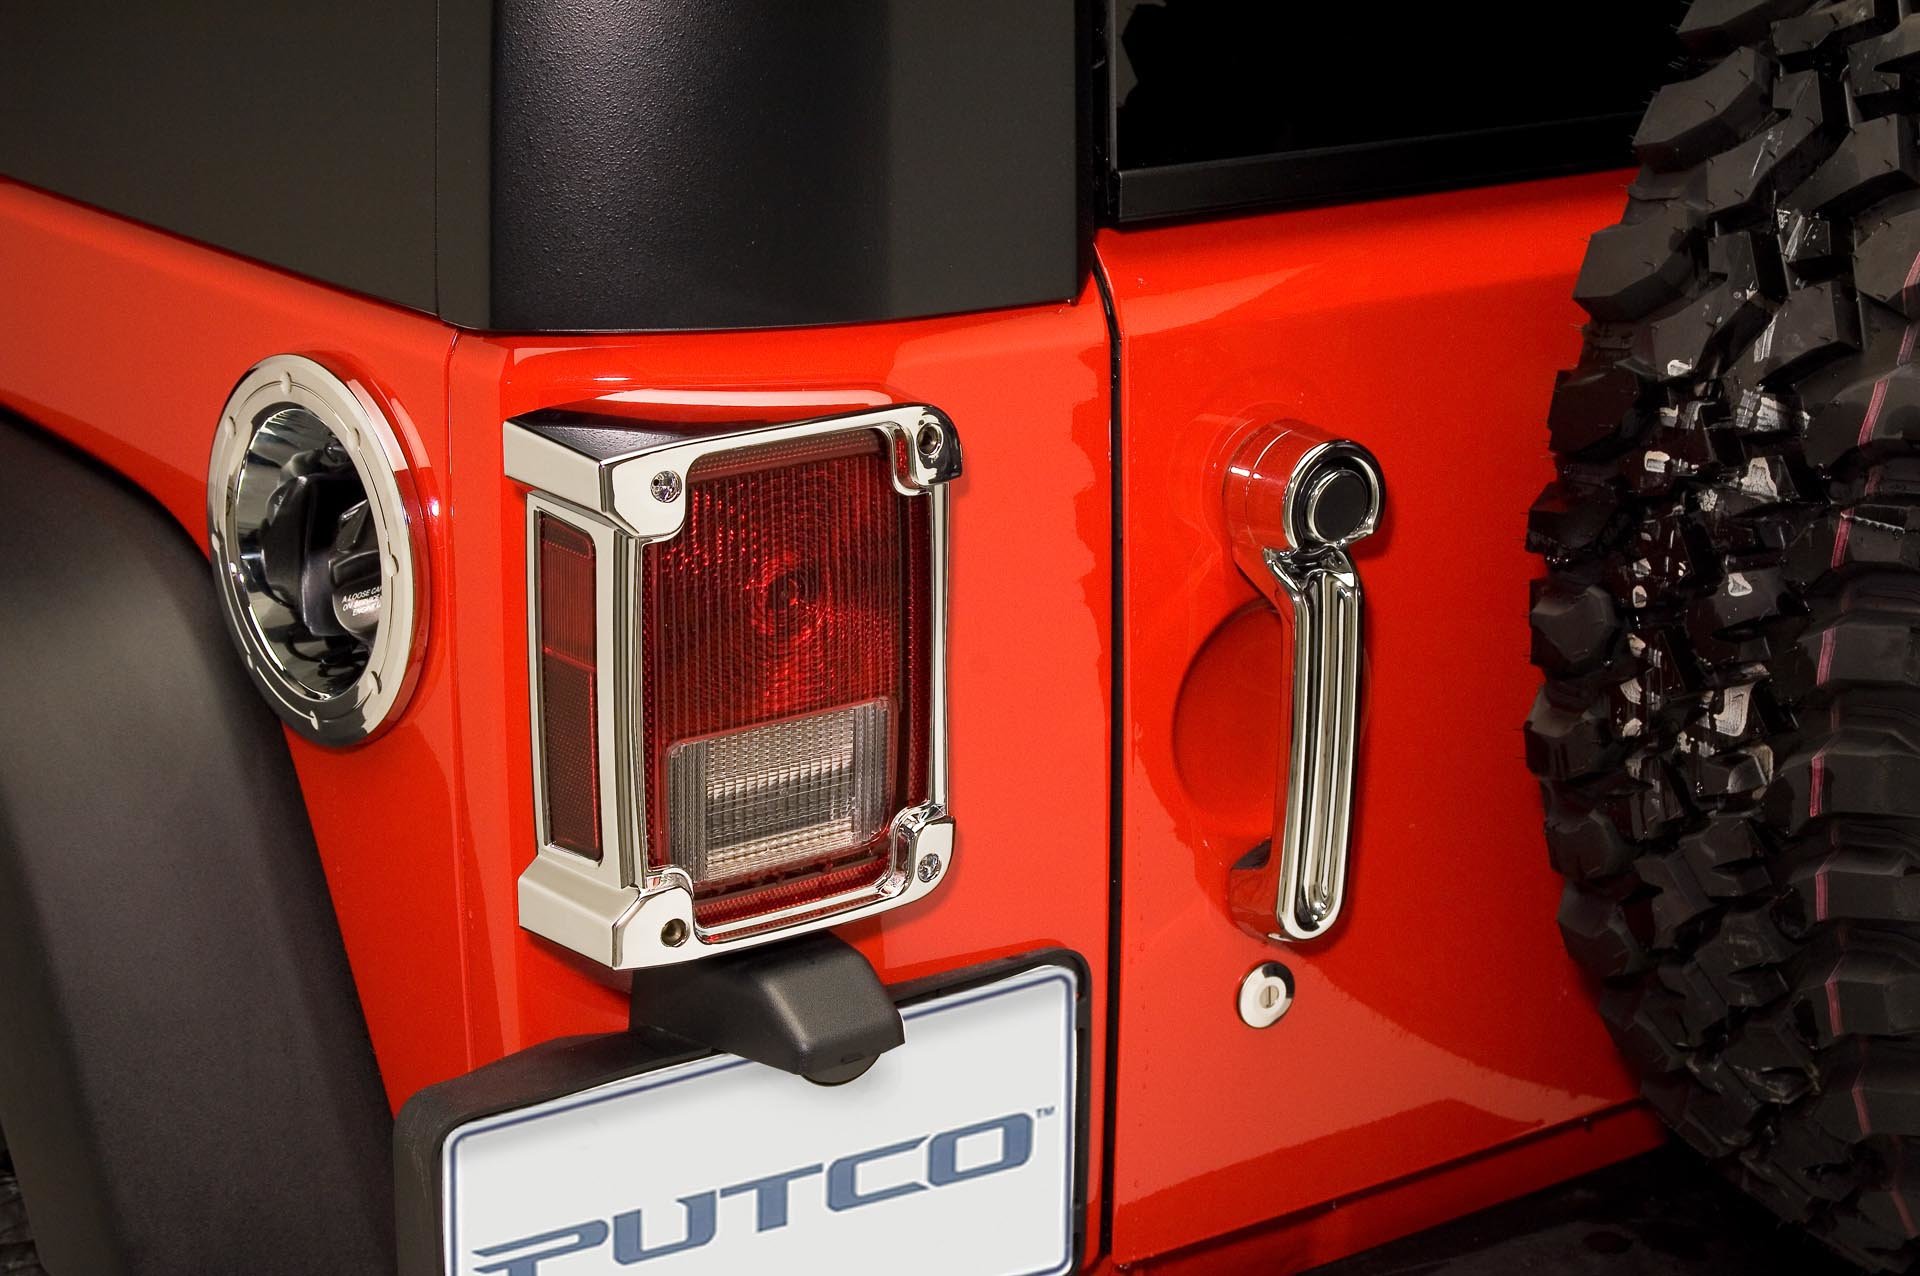 Putco™ 400893 Tail Light Covers in Chrome for 07-17 Jeep® Wrangler